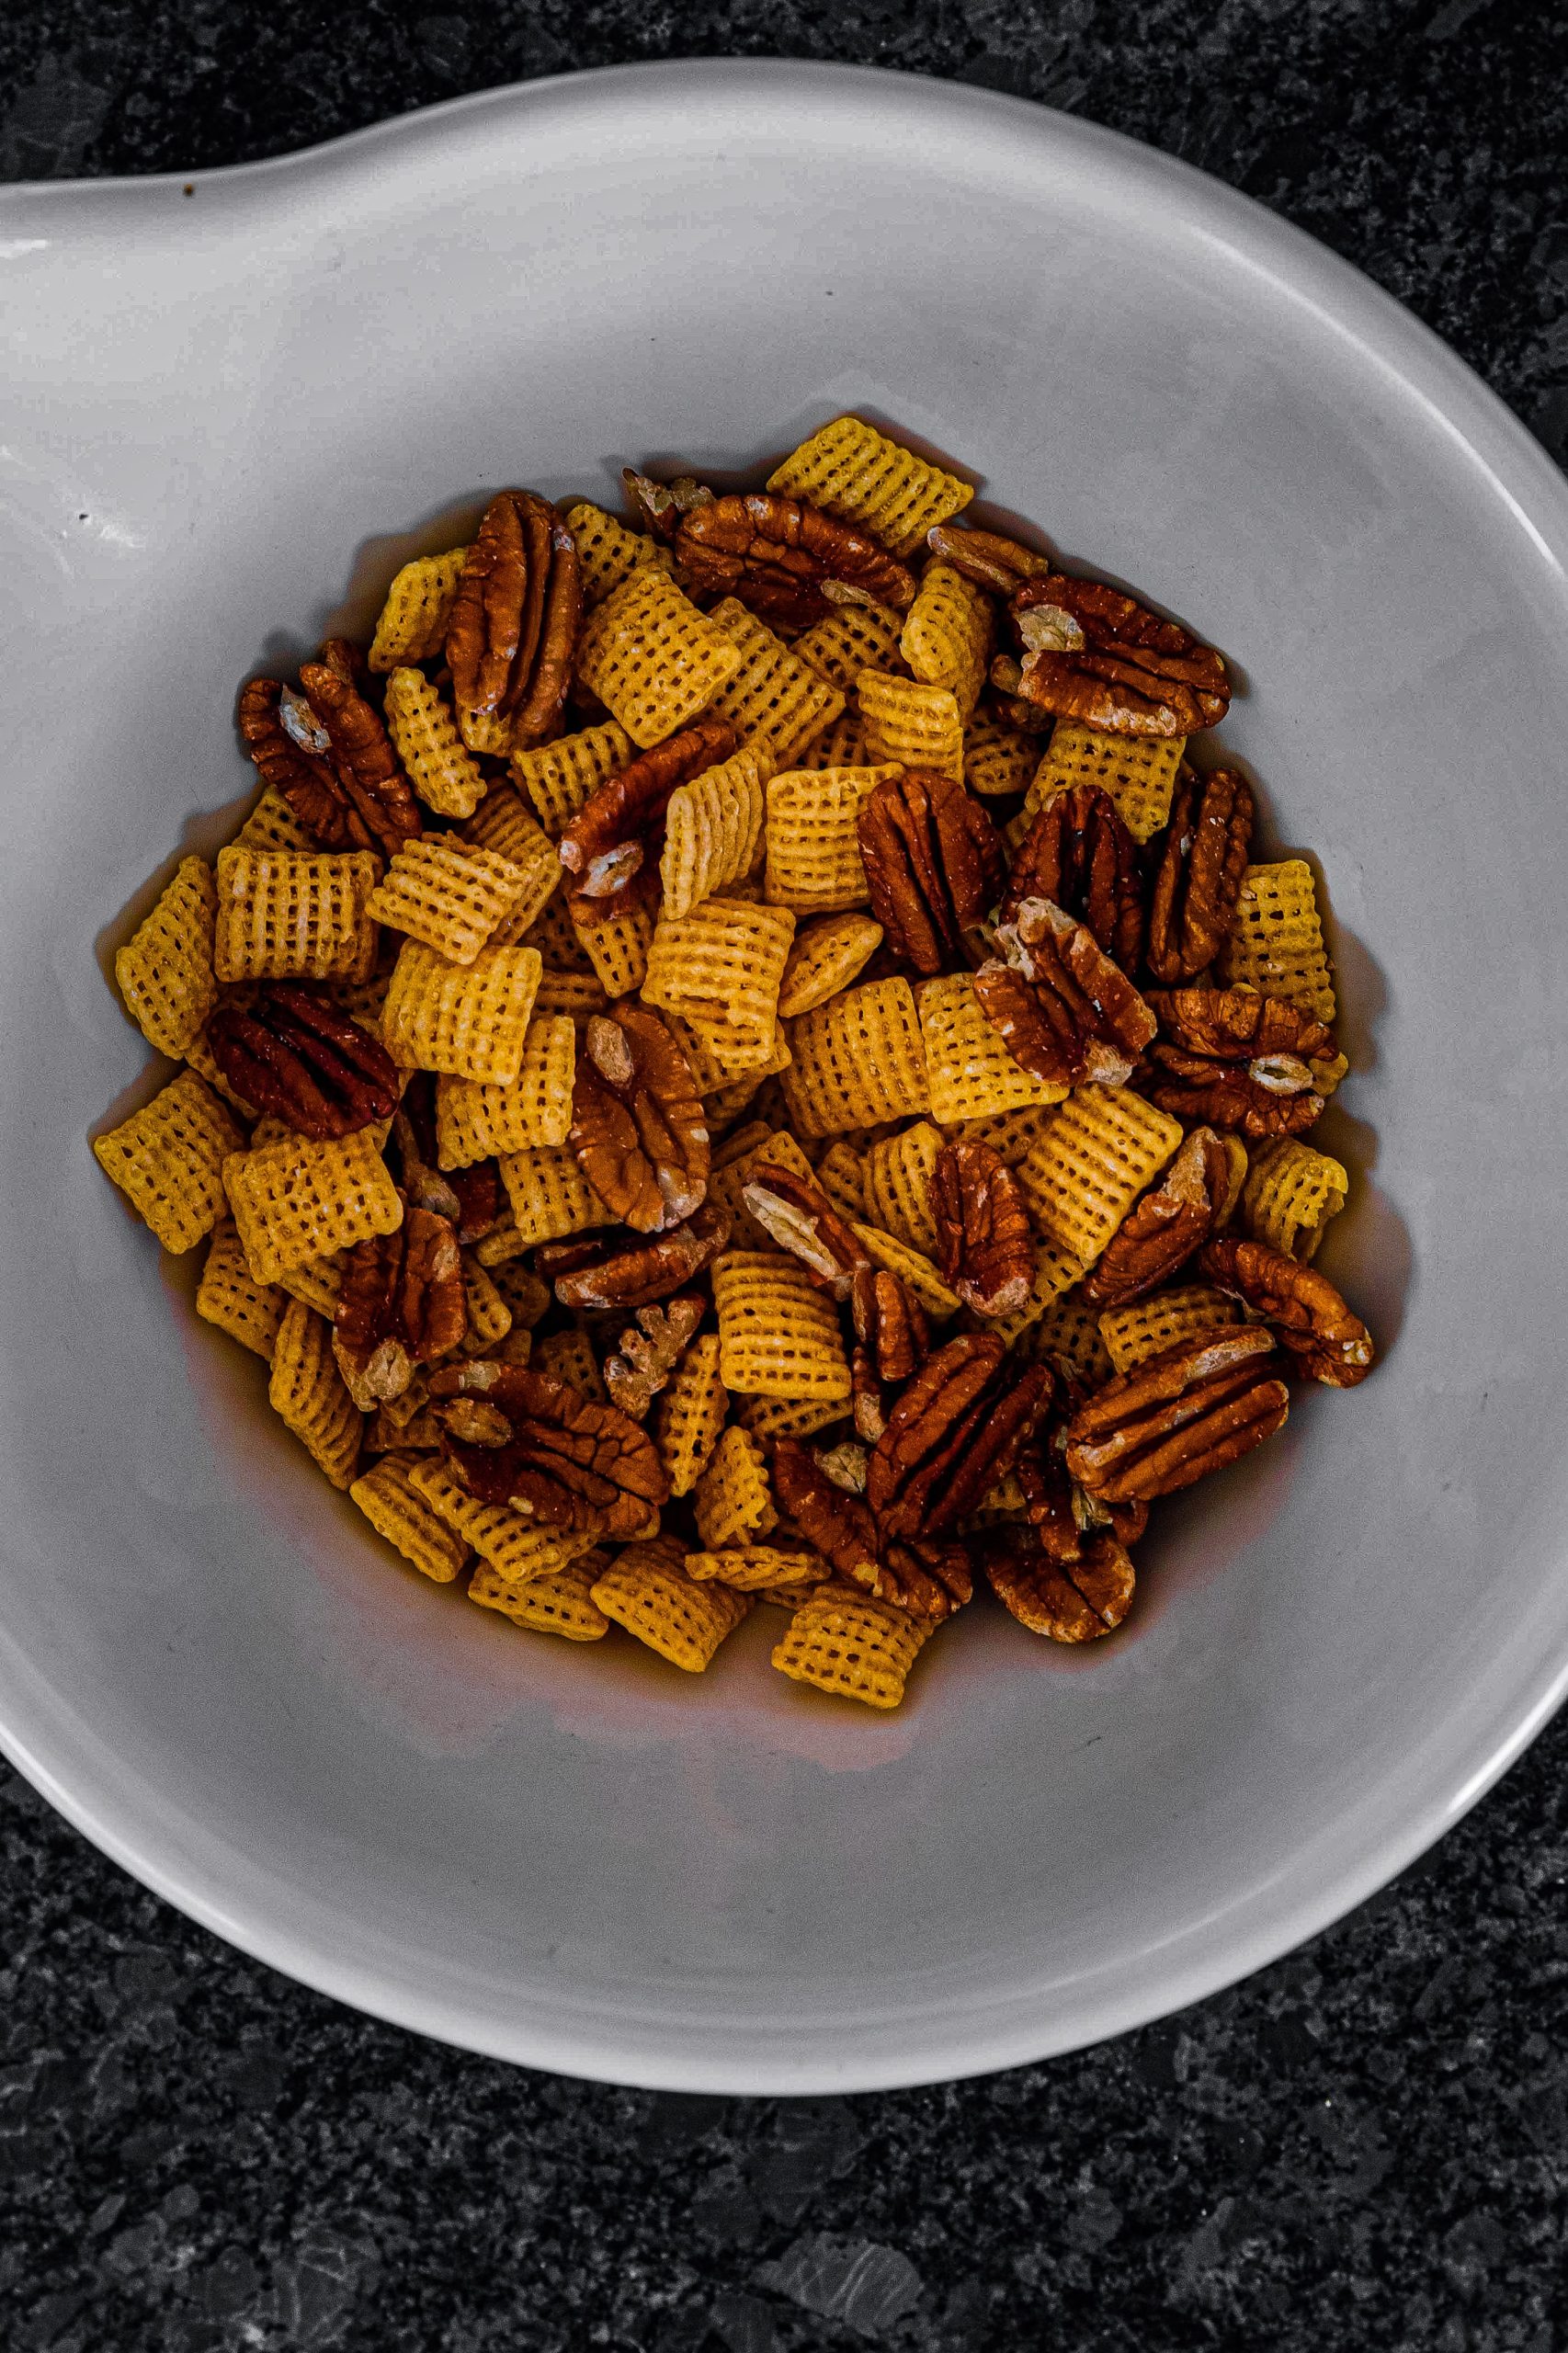 Combine cereal (or Corn Chex) and unsalted pecans.